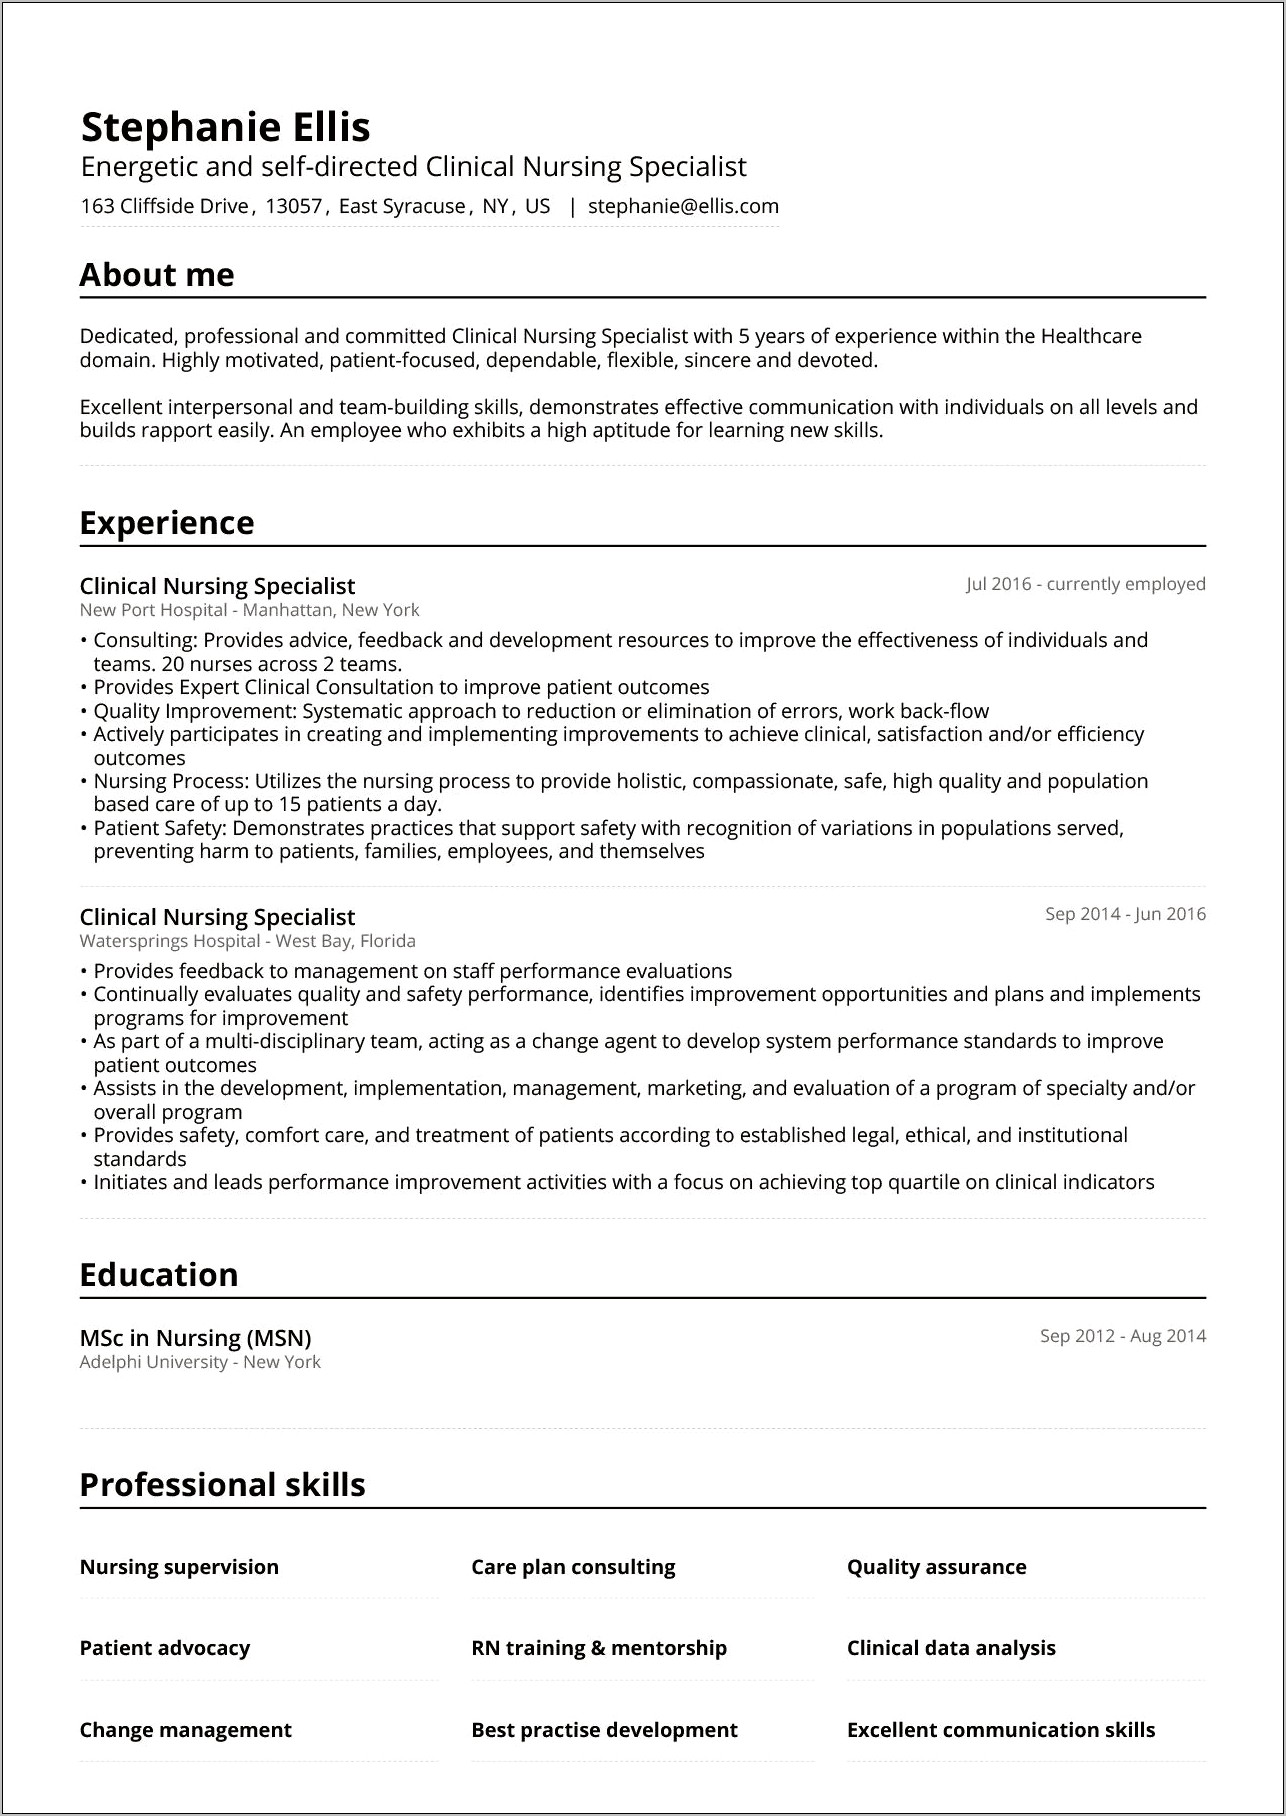 Resume Example For Traditional Reverse Chronological Format